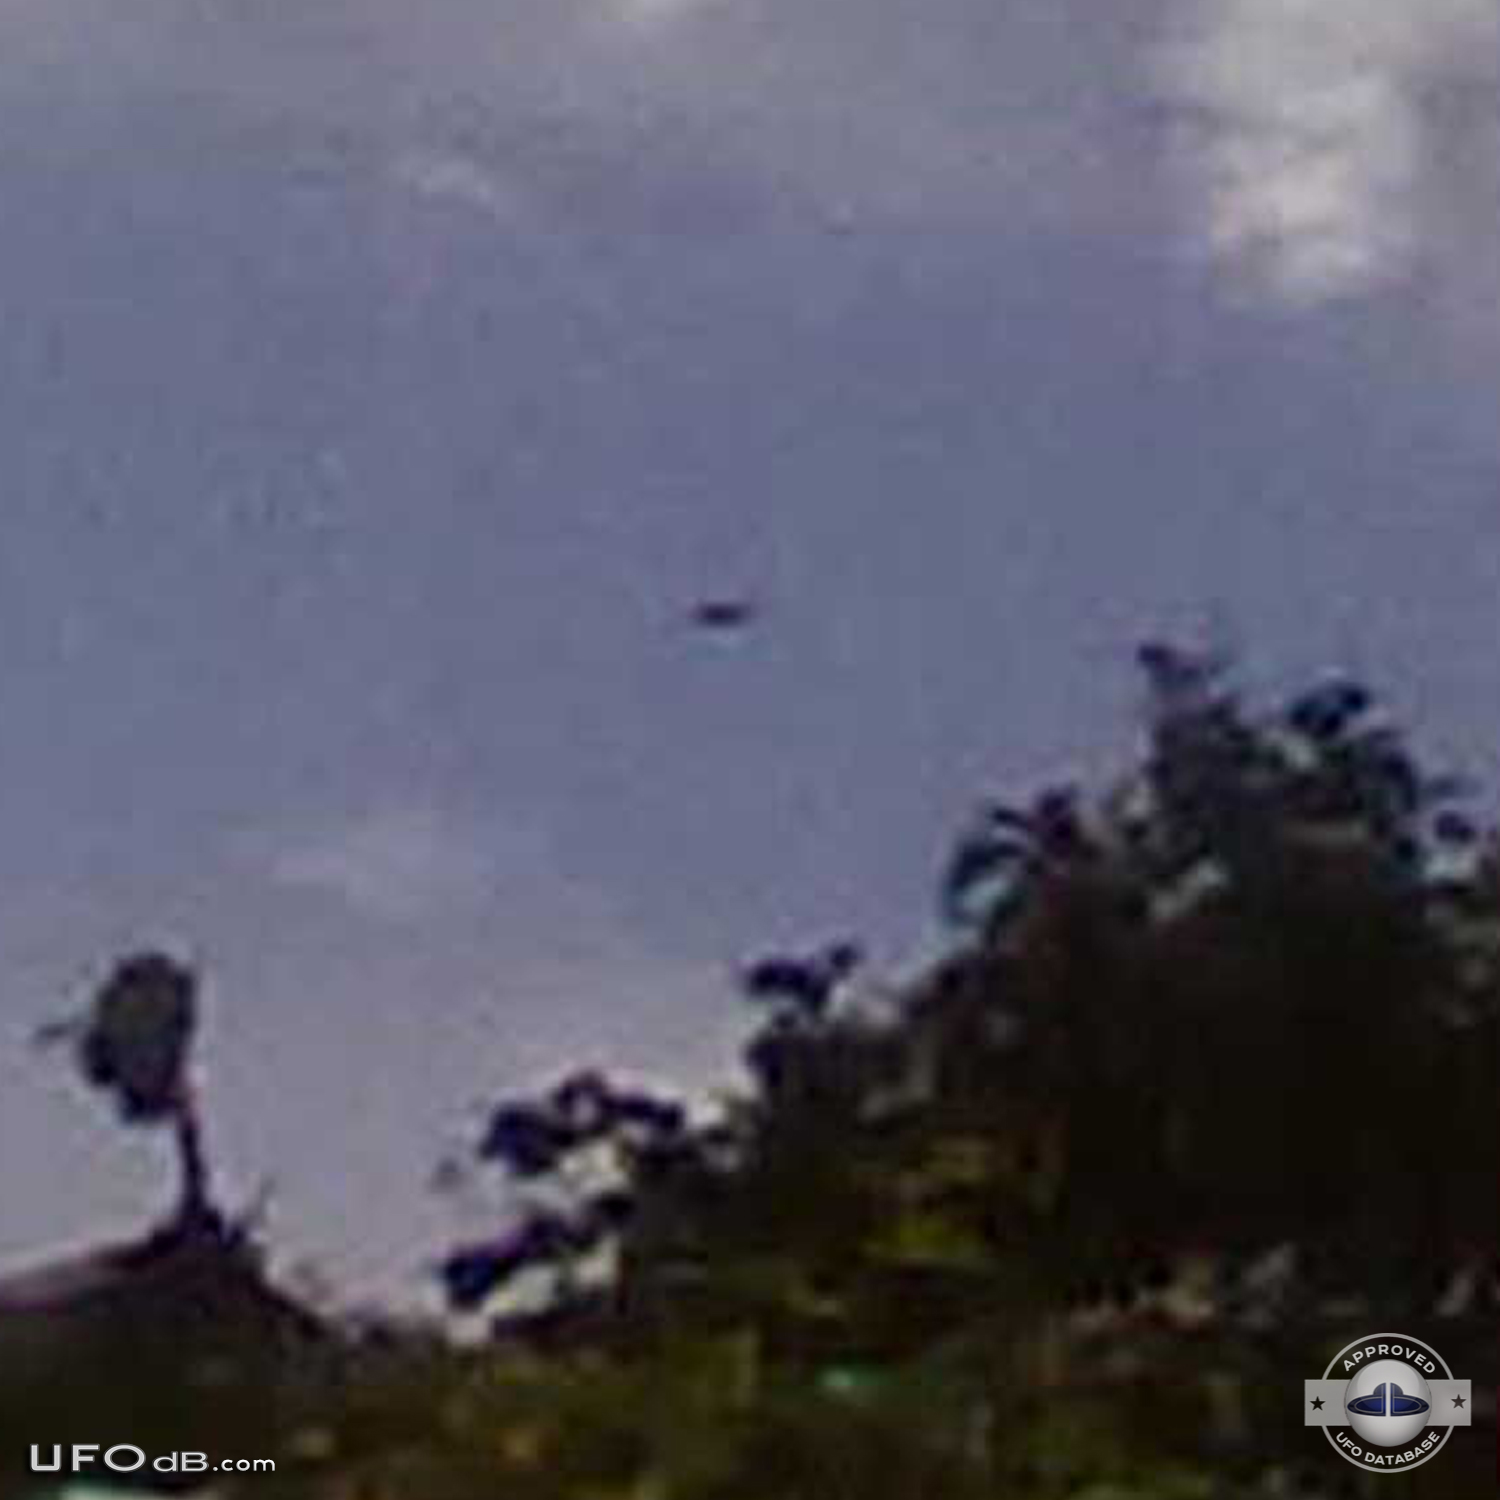 Newyorker with 170 ufo sightings gives us ufo pictures to prove it UFO Picture #401-6